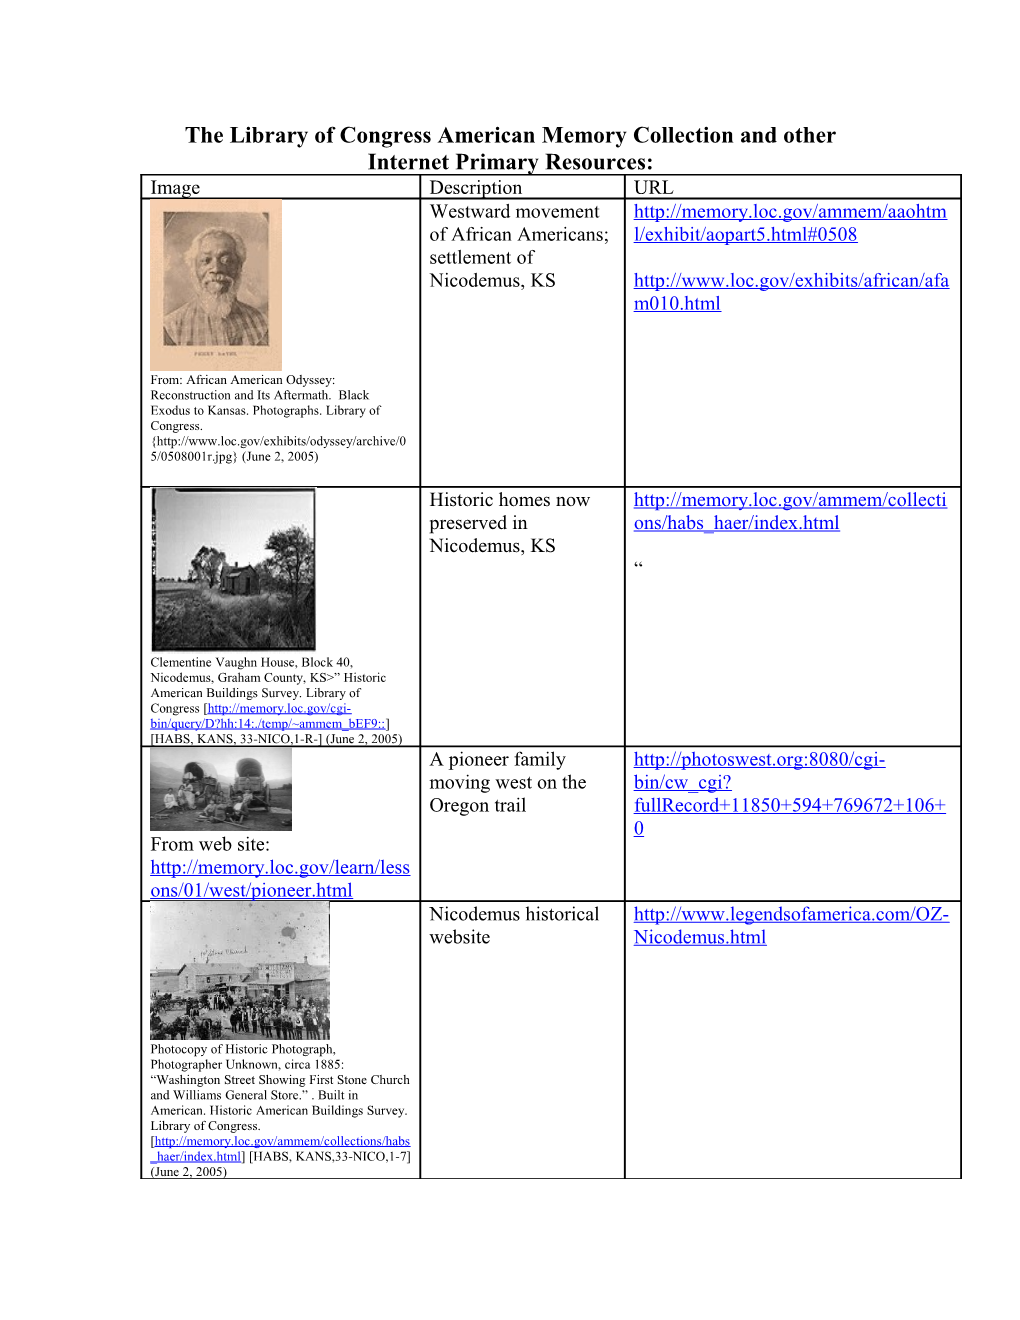 The Library Of Congress American Memory Collection And Other Internet Primary Resources: